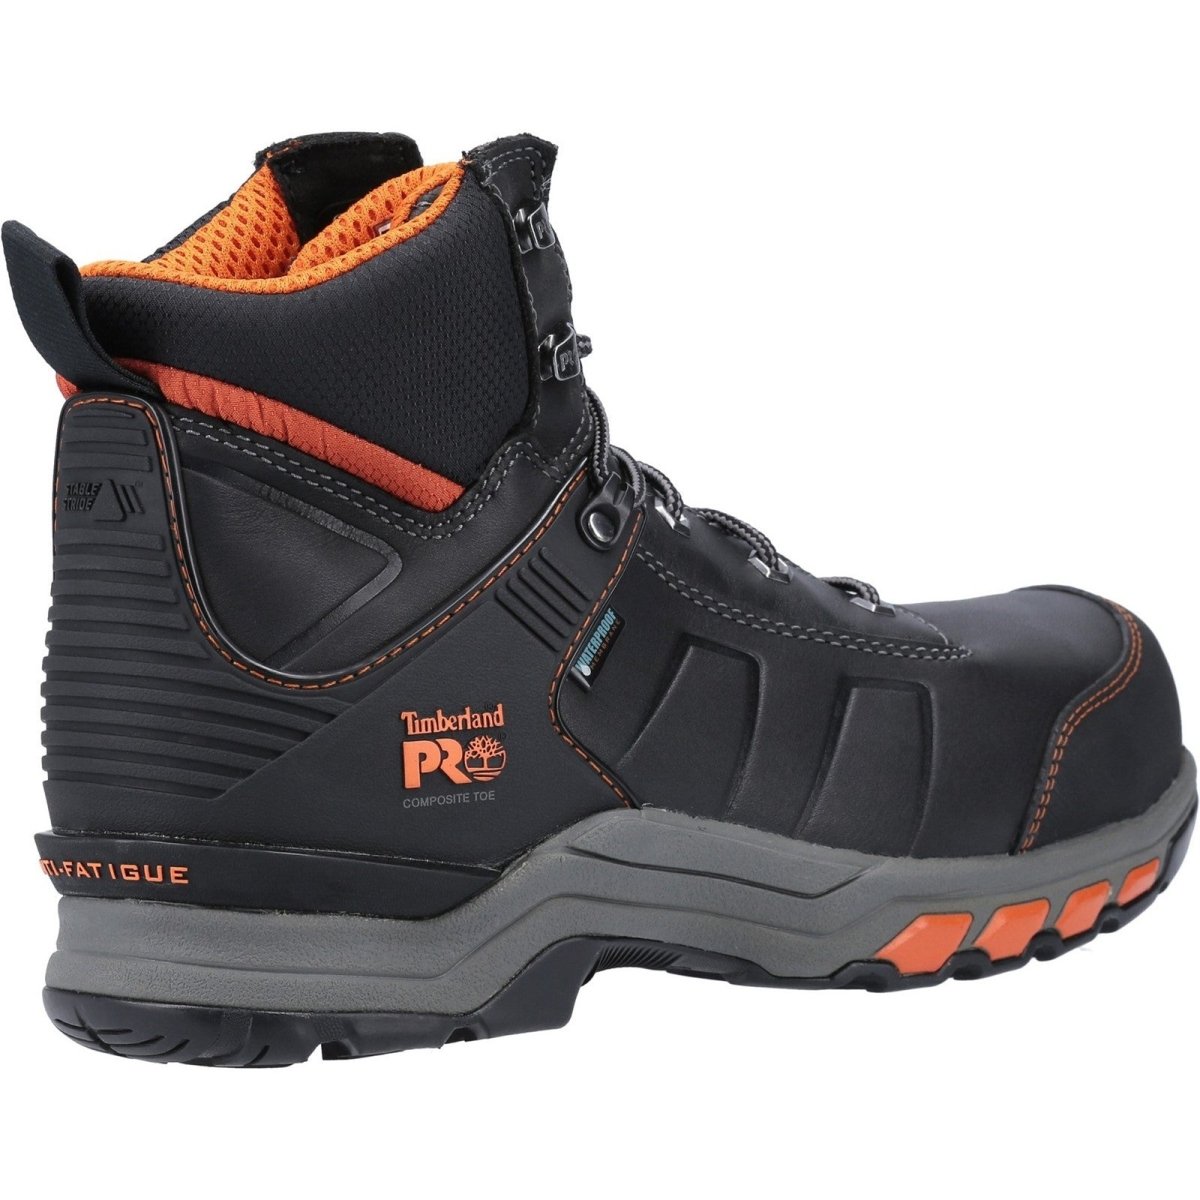 Timberland Pro Hypercharge Composite Safety Toe Work Boot - Shoe Store Direct